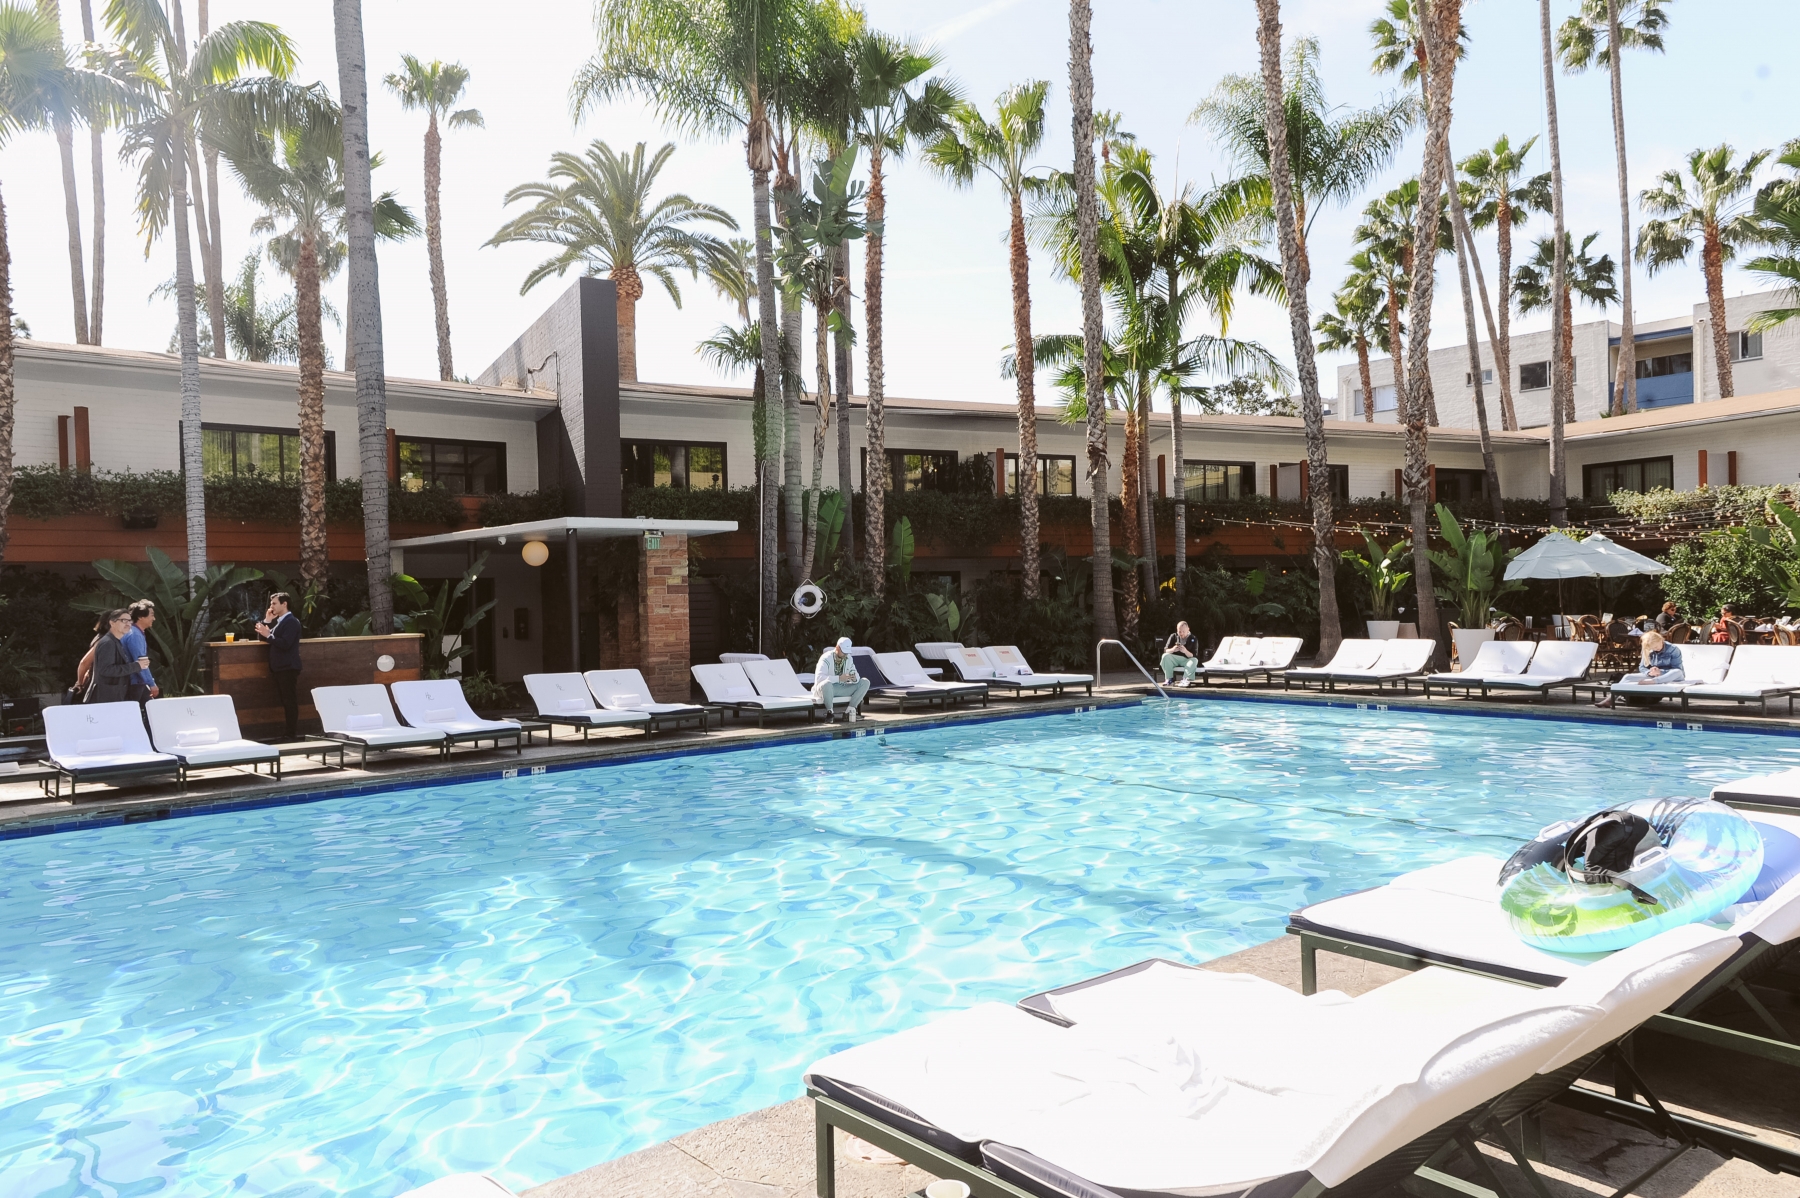 The pool at the Roosevelt Hotel in Hollywood where galleries use the surrounding cabana rooms as booths at the Felix Art Fair.